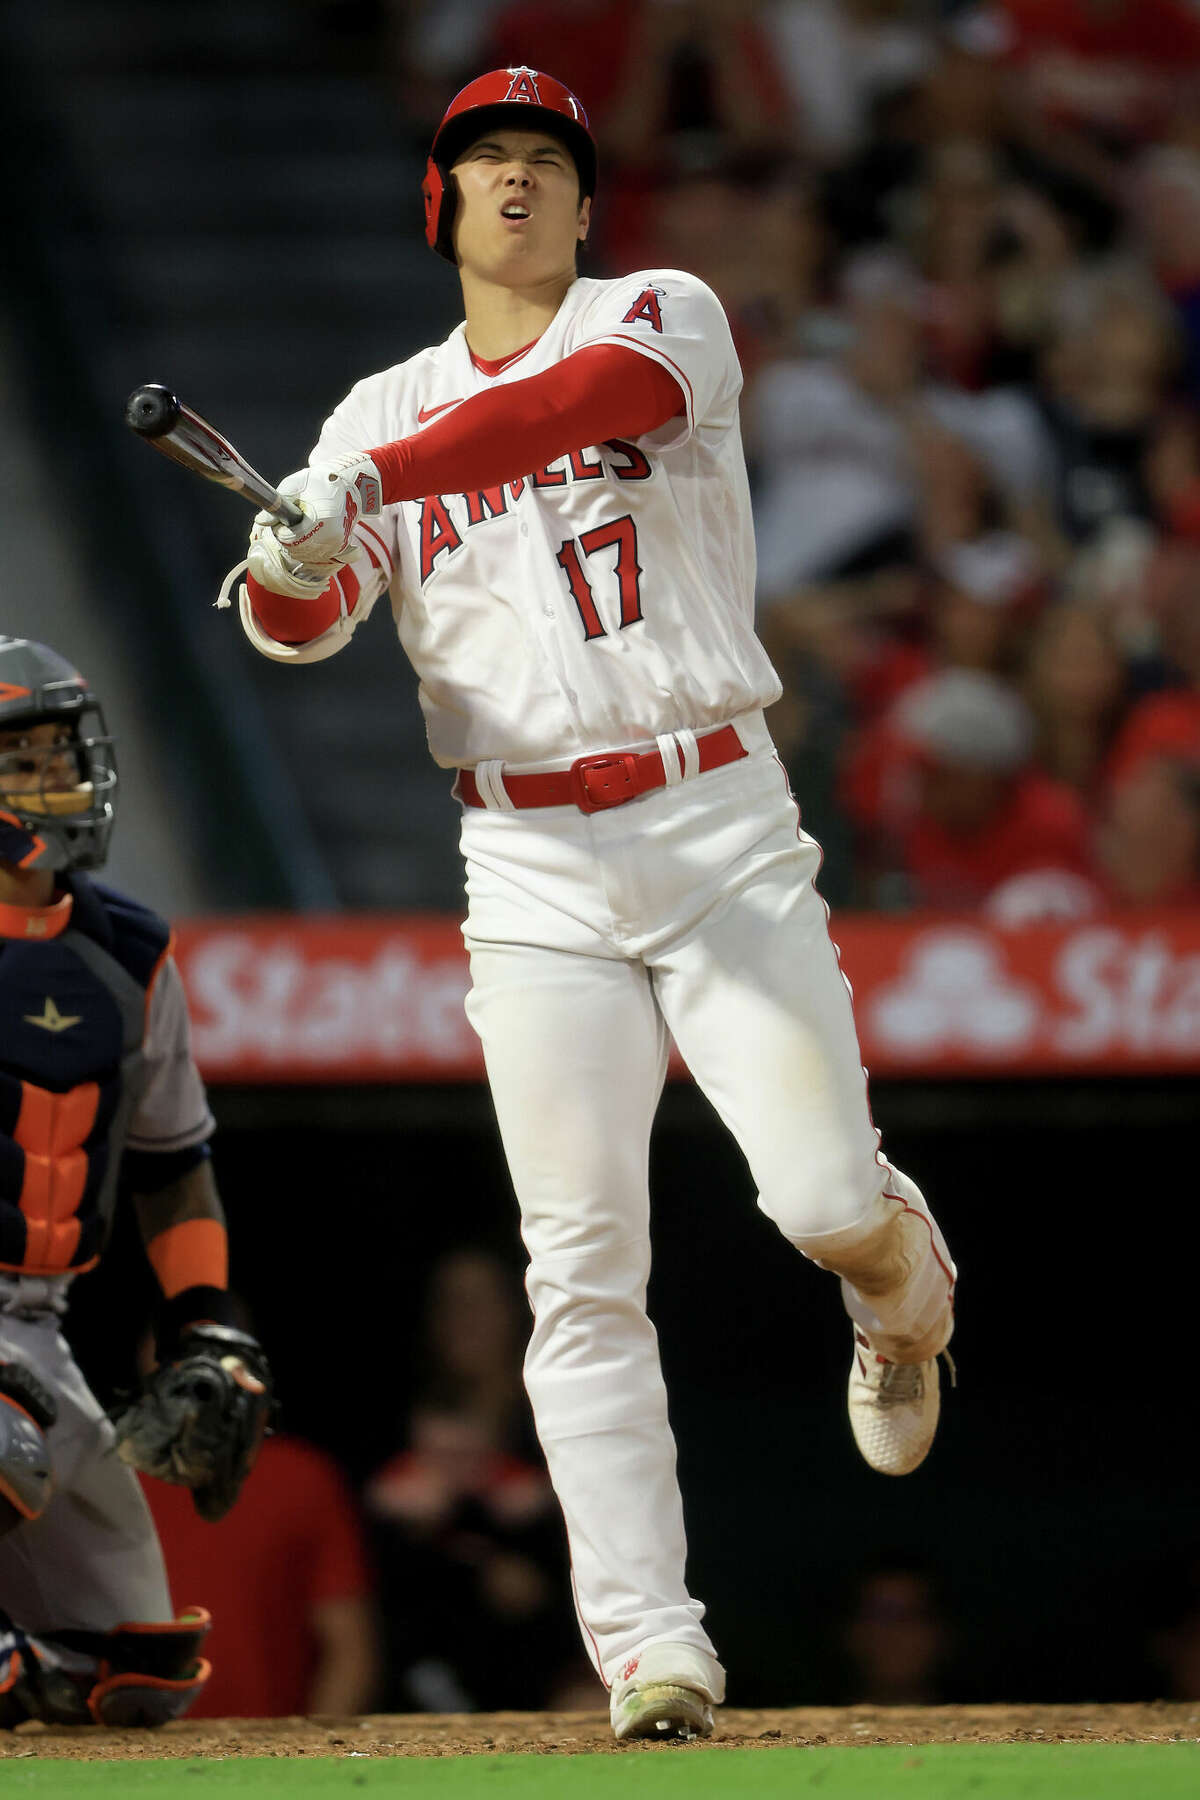 Shohei Ohtani of the Los Angeles Angels bats against the Houston